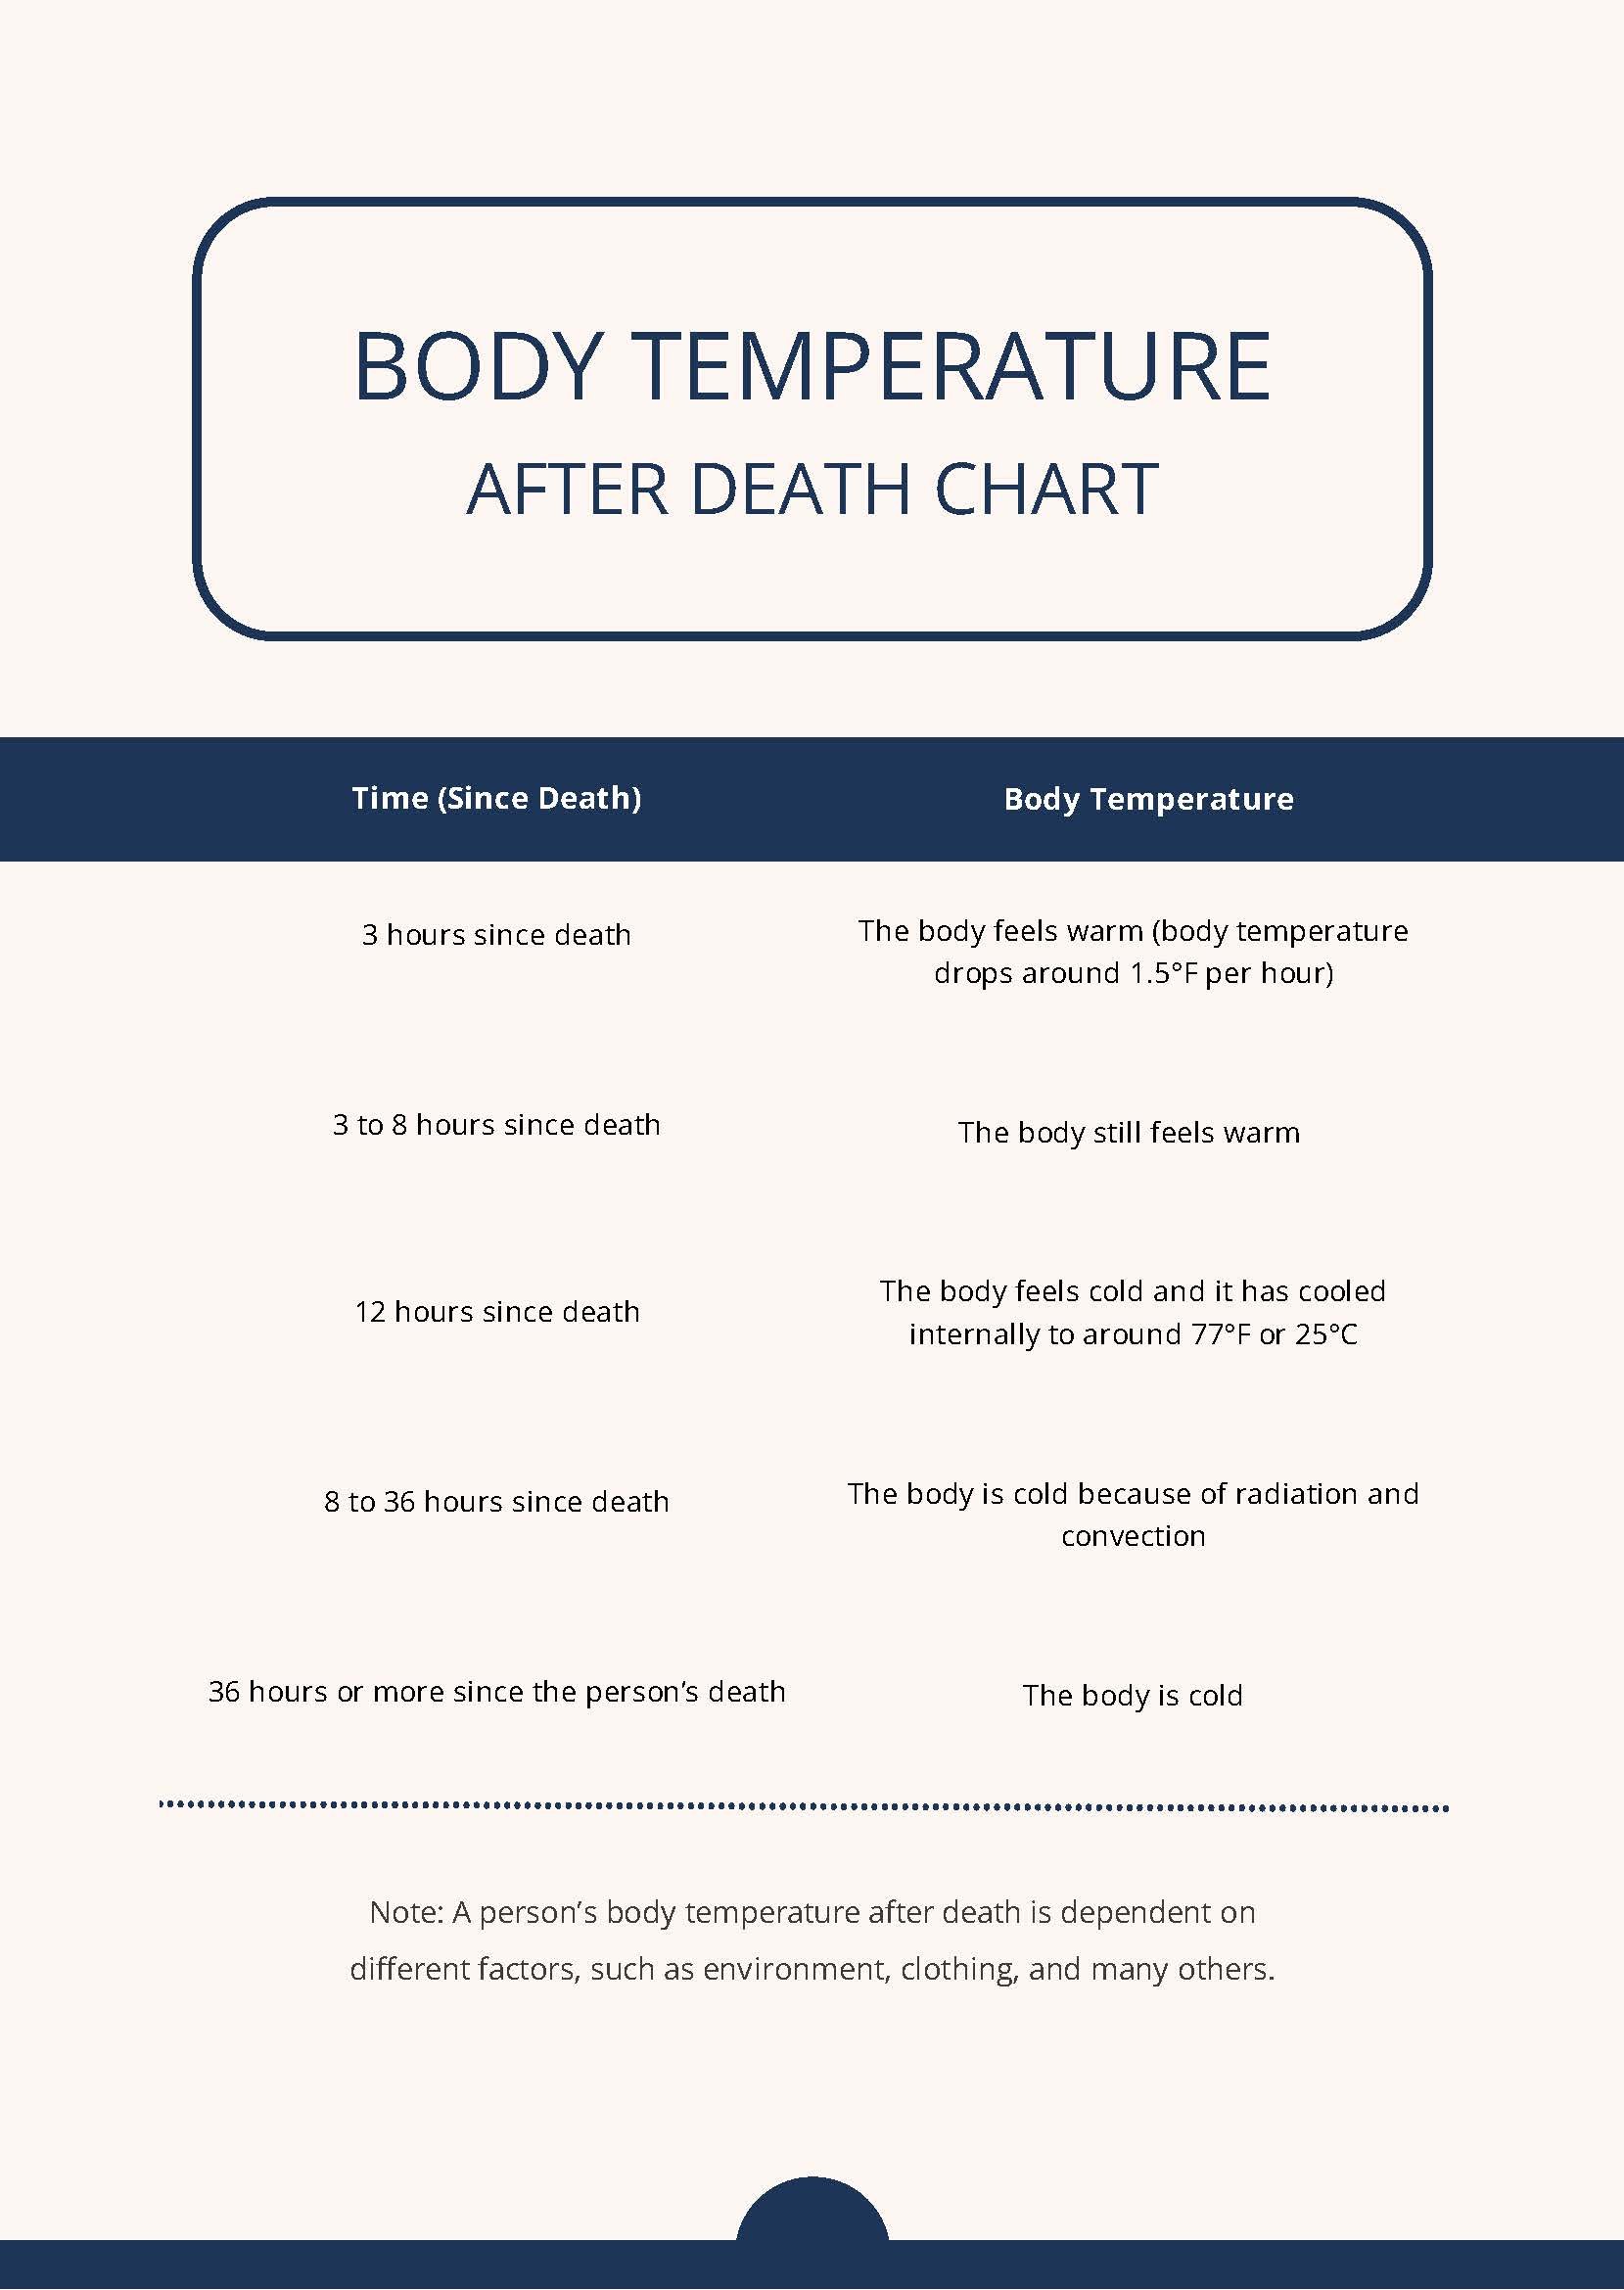 Body Temperature After Death Chart in PDF